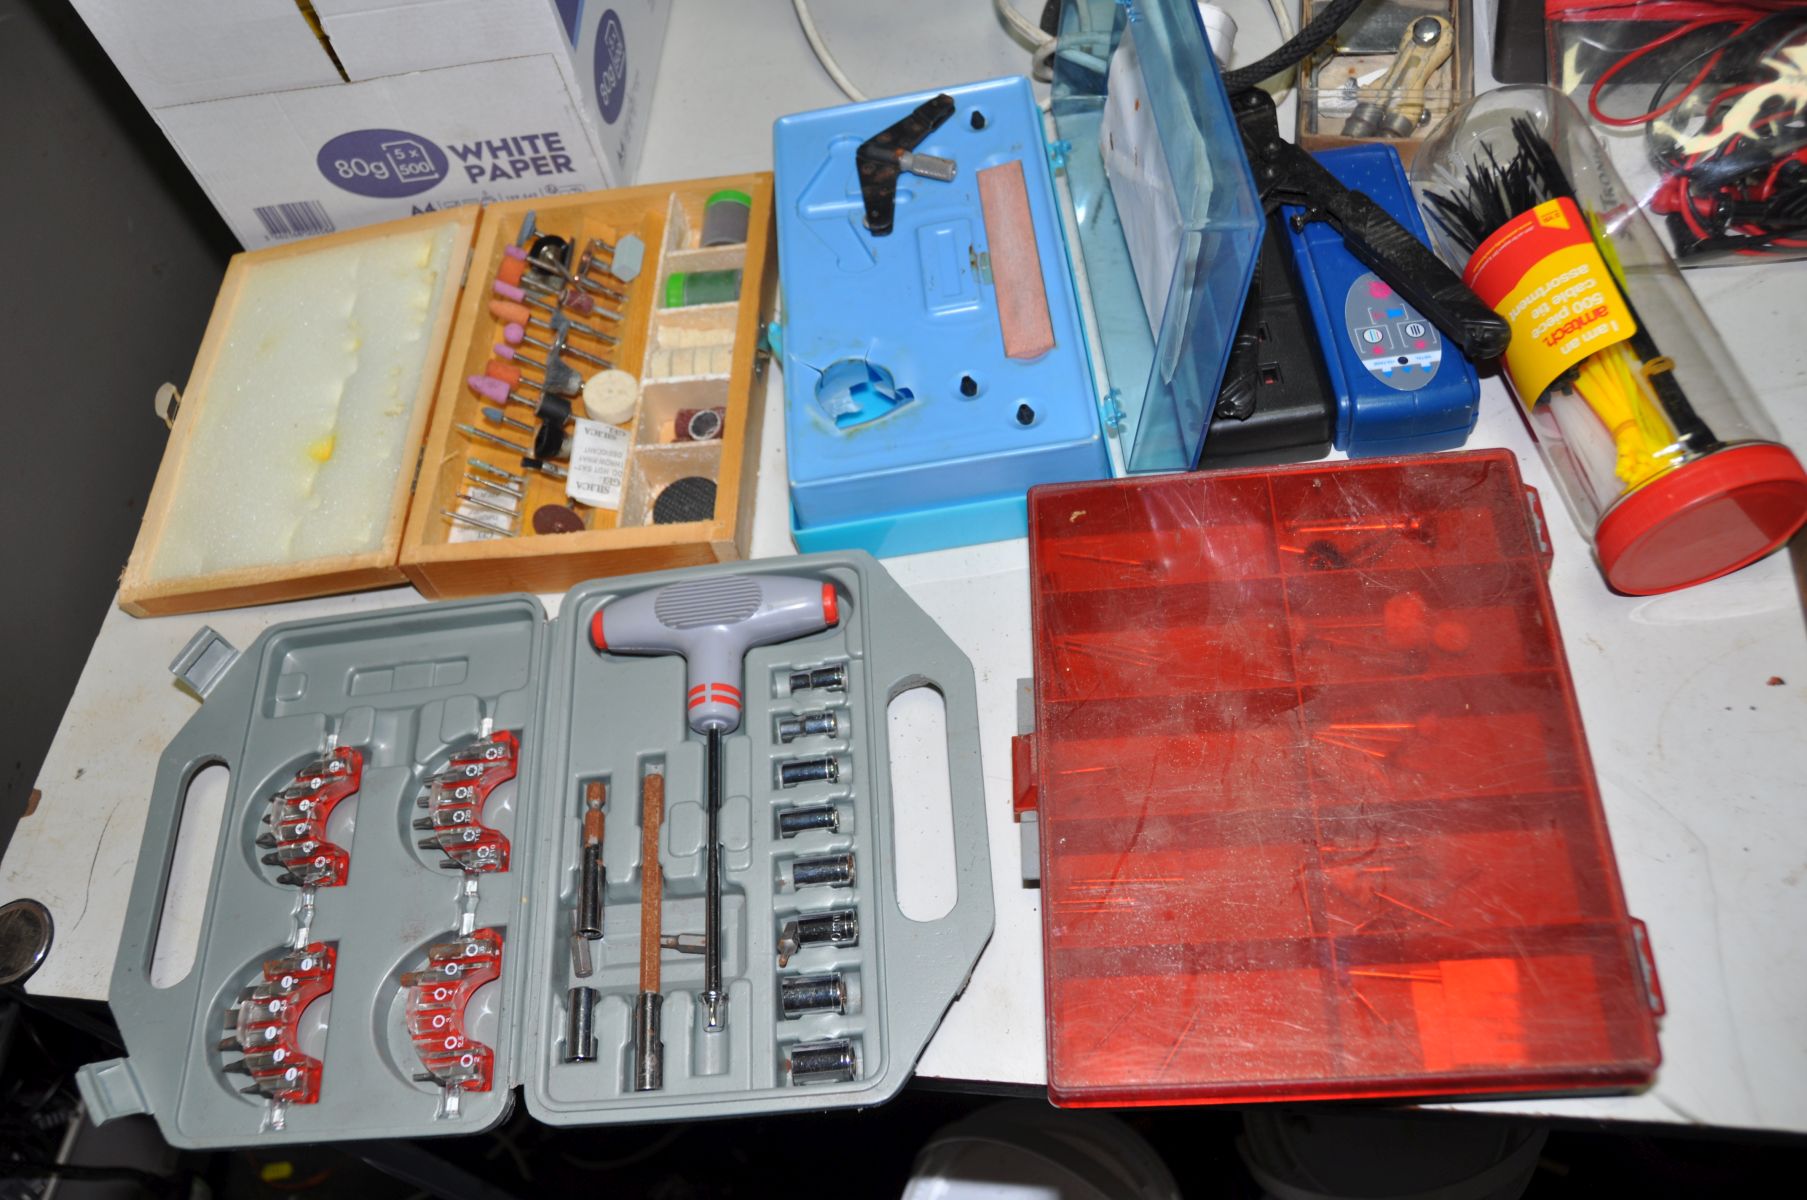 A TRAY CONTAINING HANDTOOLS AND A MINI COMPRESSOR (untested) including a multimeter, screwdrivers, - Image 2 of 6